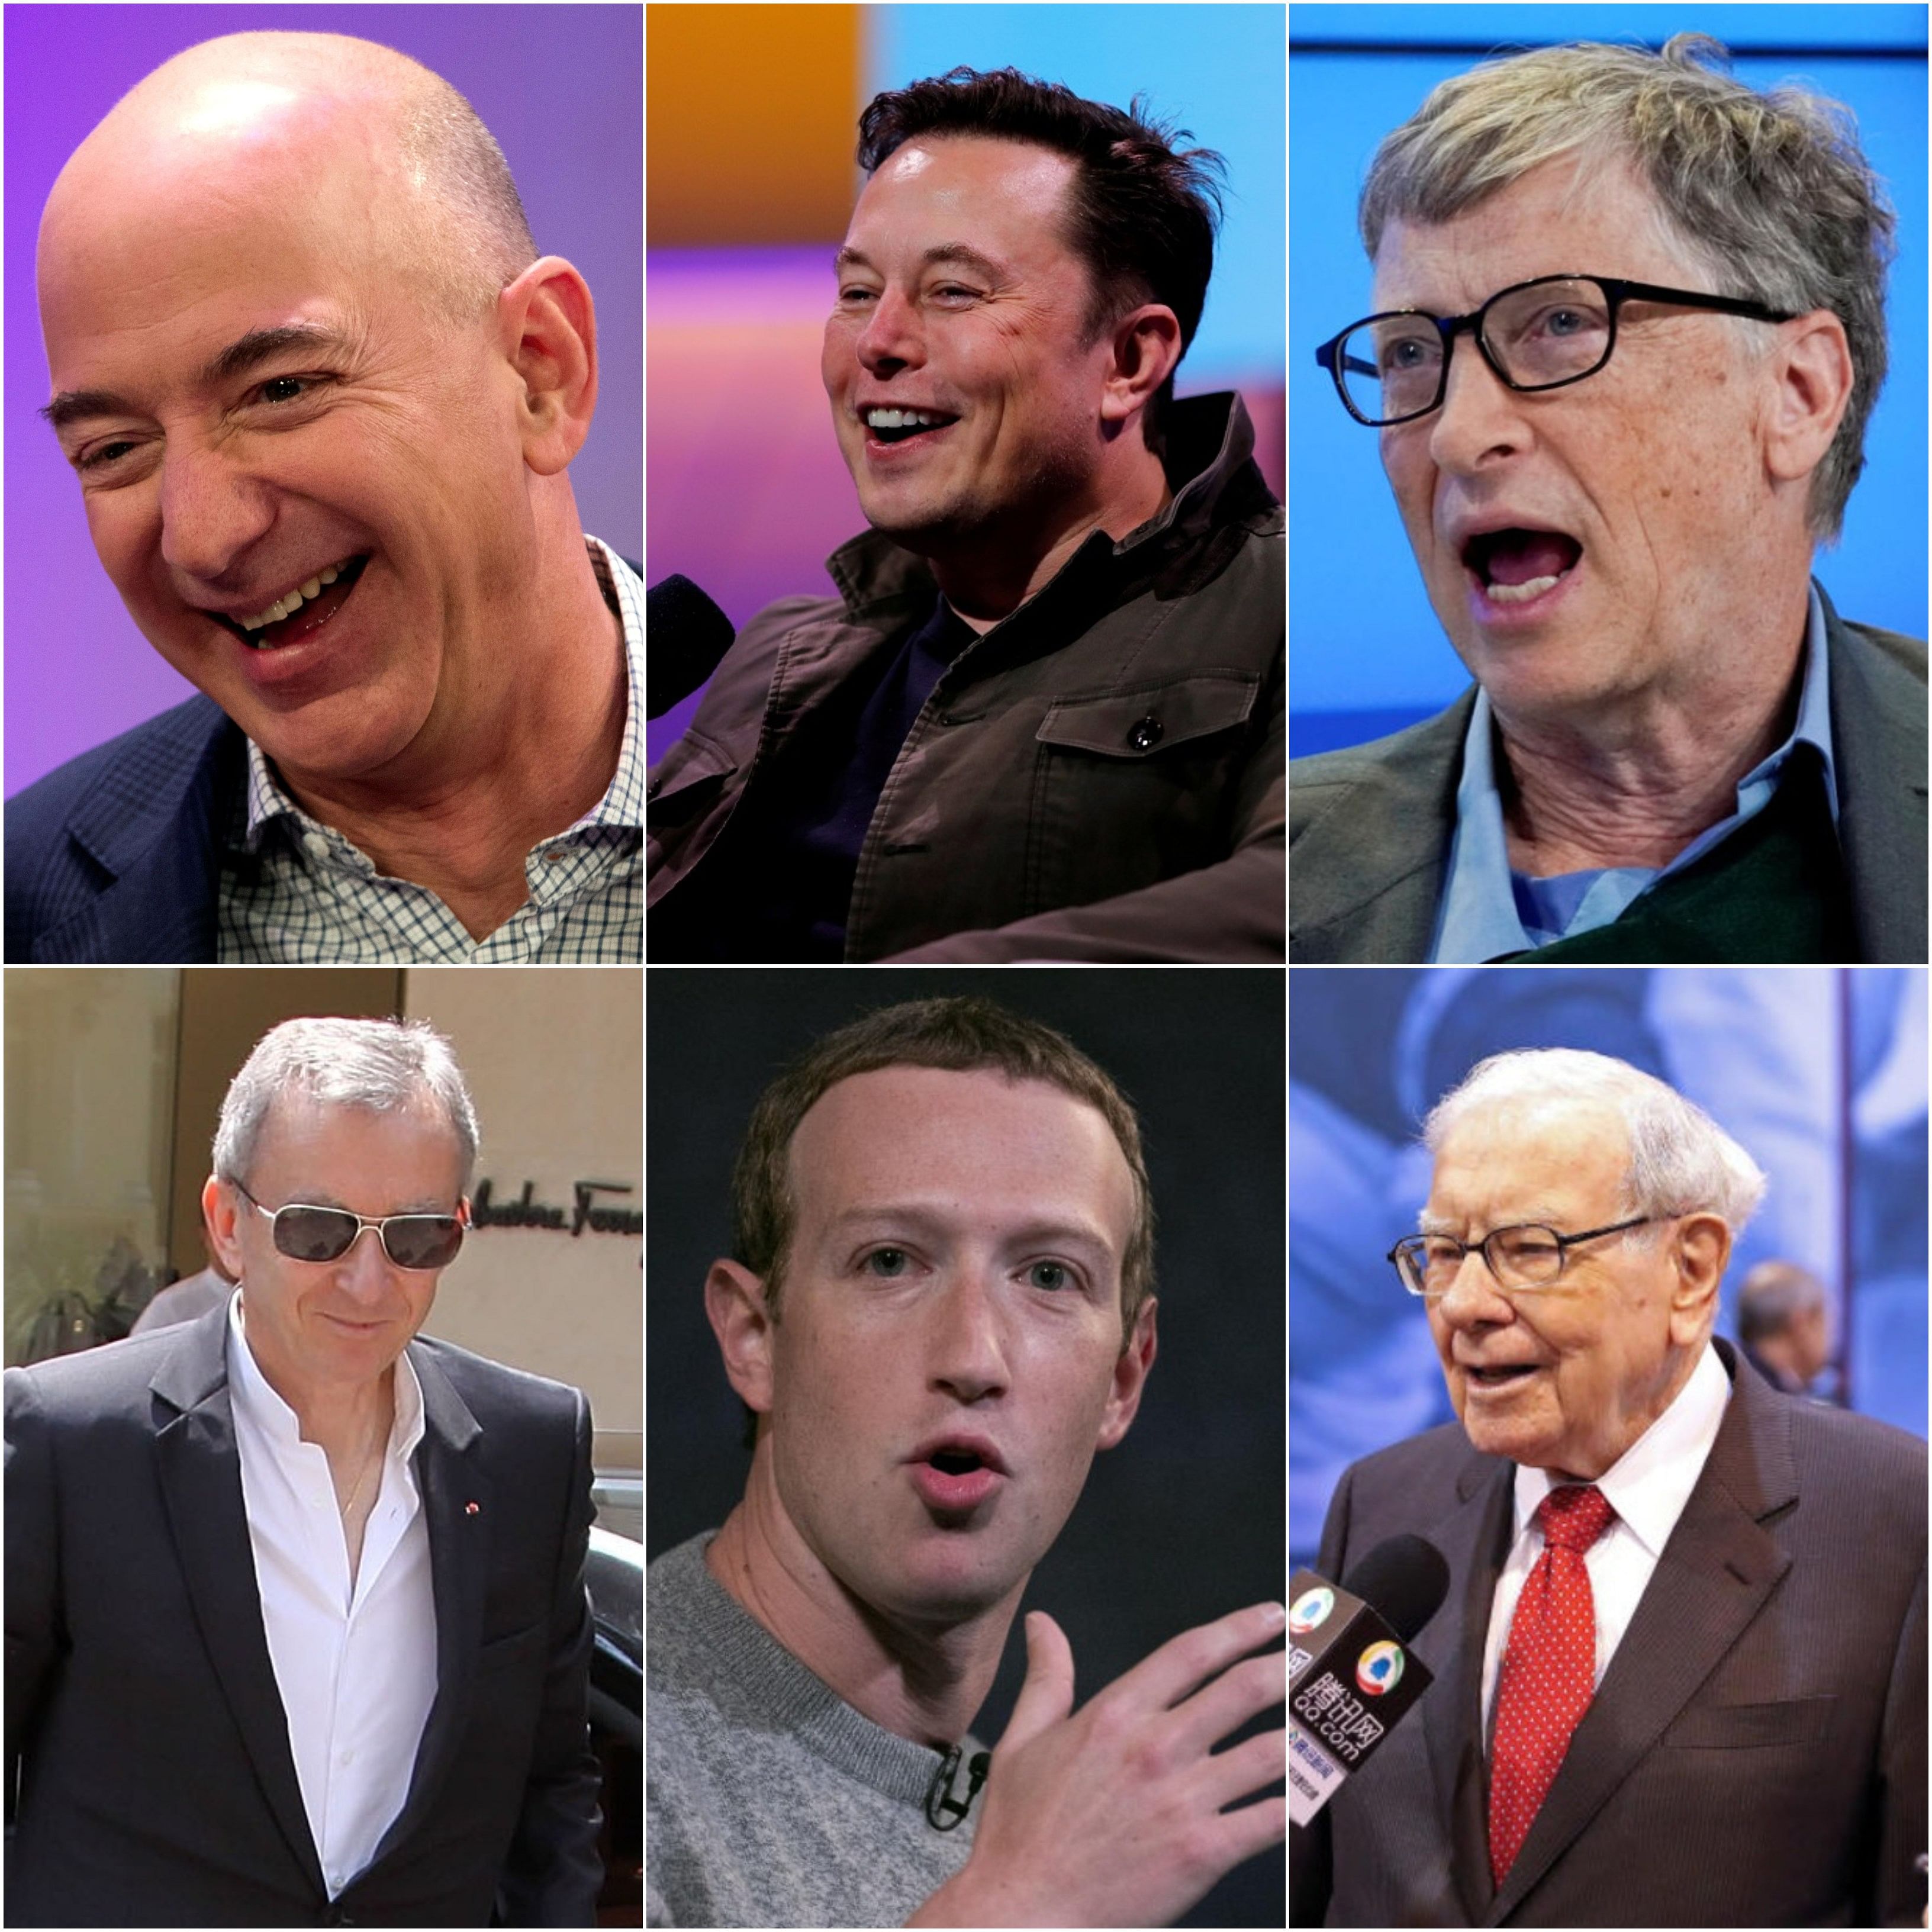 In Pics | Meet the 6 members of the $100 billion club